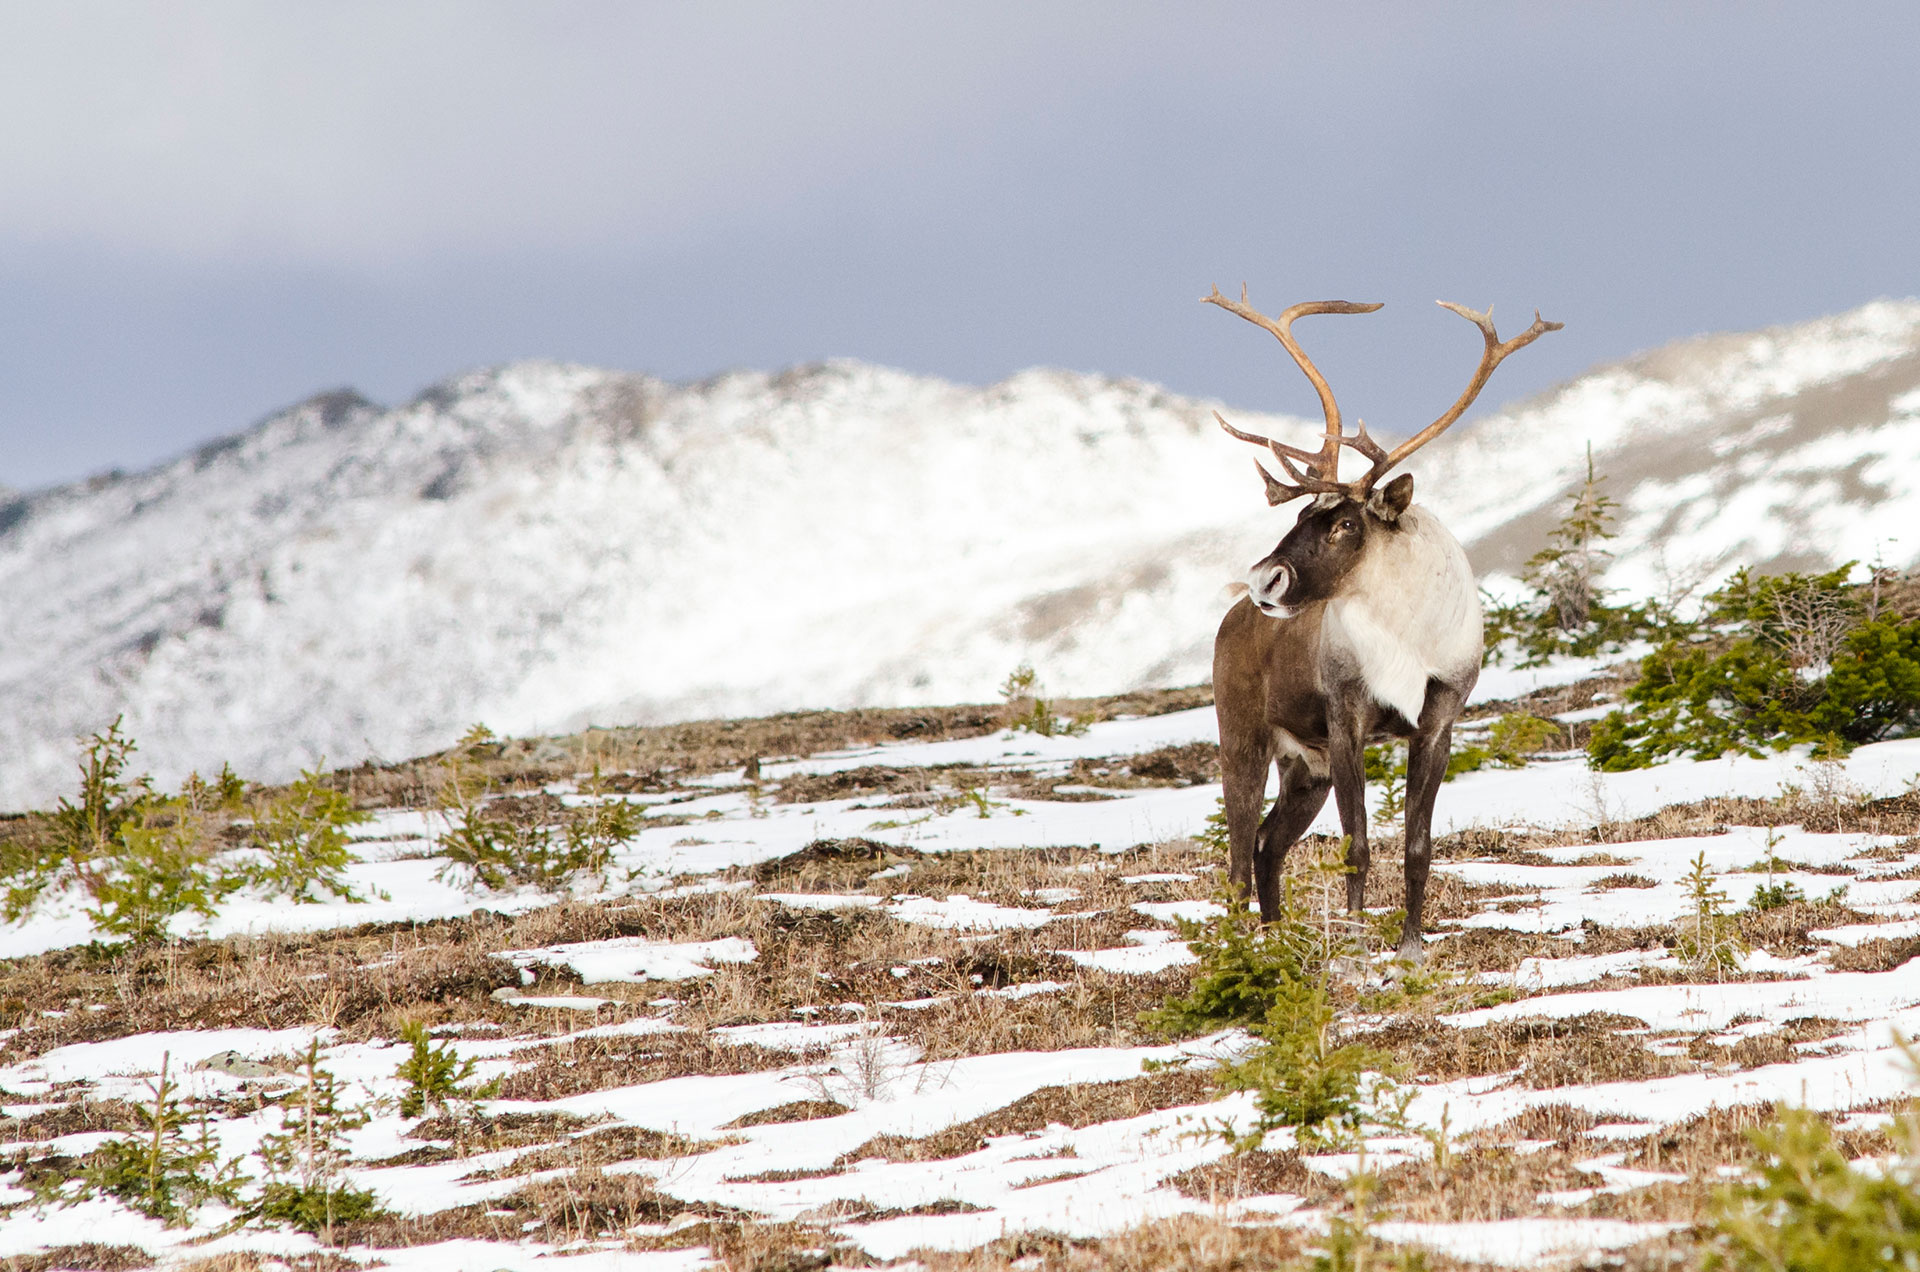 Southern mountain caribou, Conservation science, Conservation efforts, Wildlife protection, 1920x1280 HD Desktop